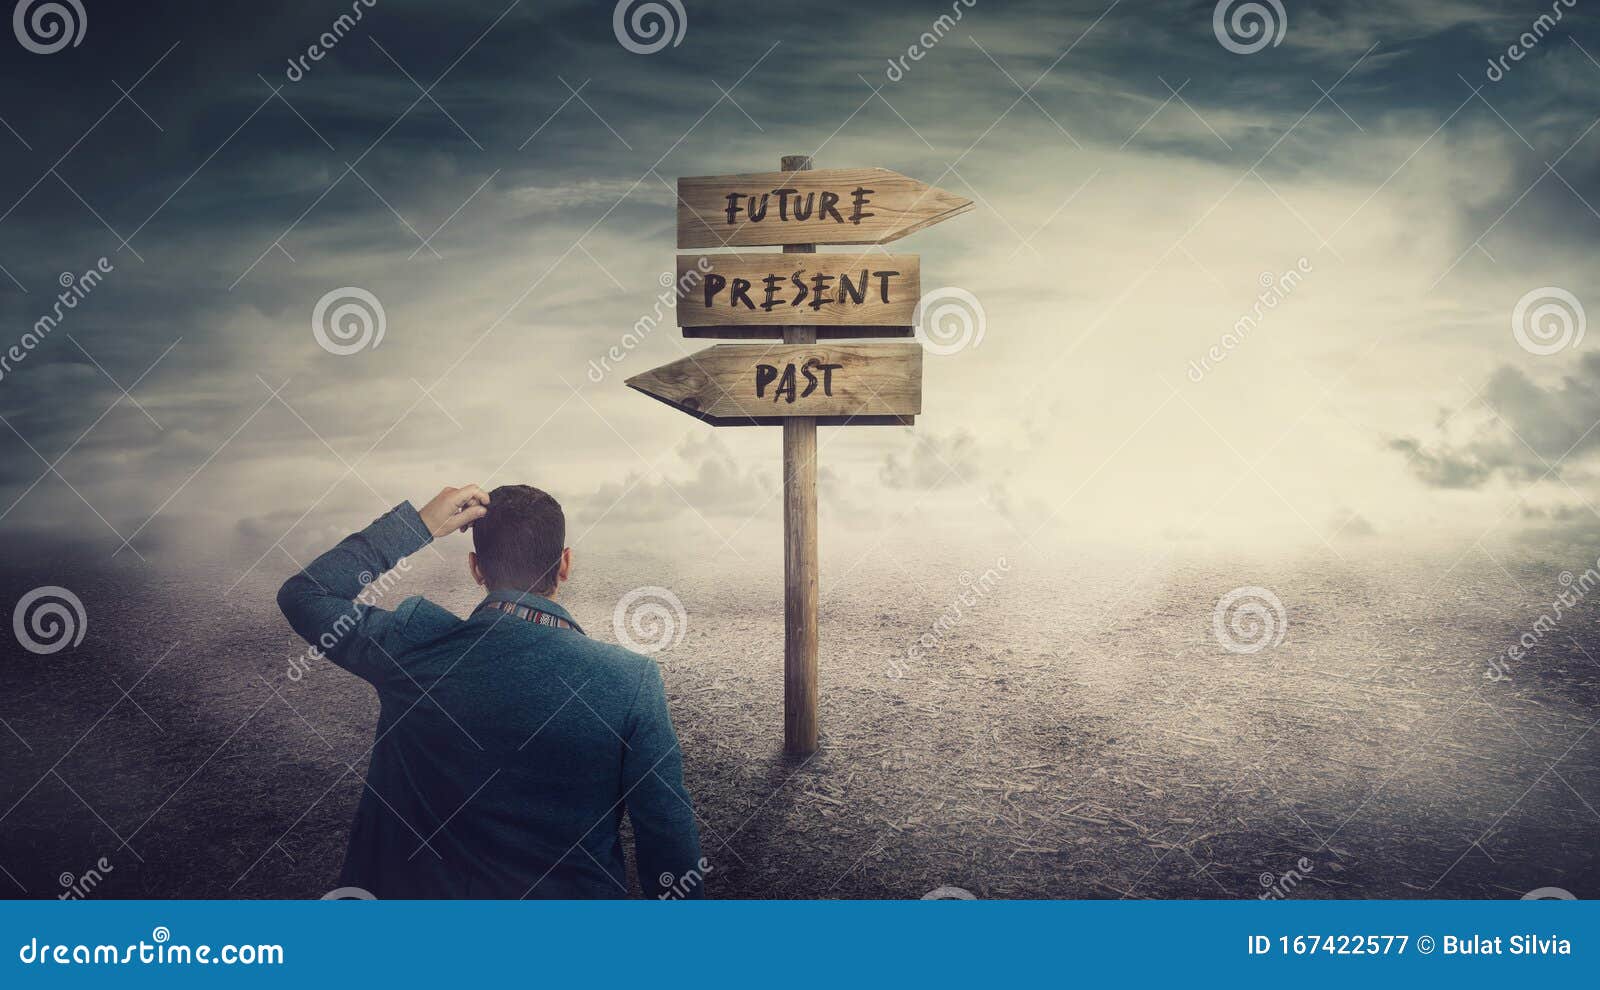 surreal scene, businessman and a signpost arrows showing three different options, past, present and future course. choose journey